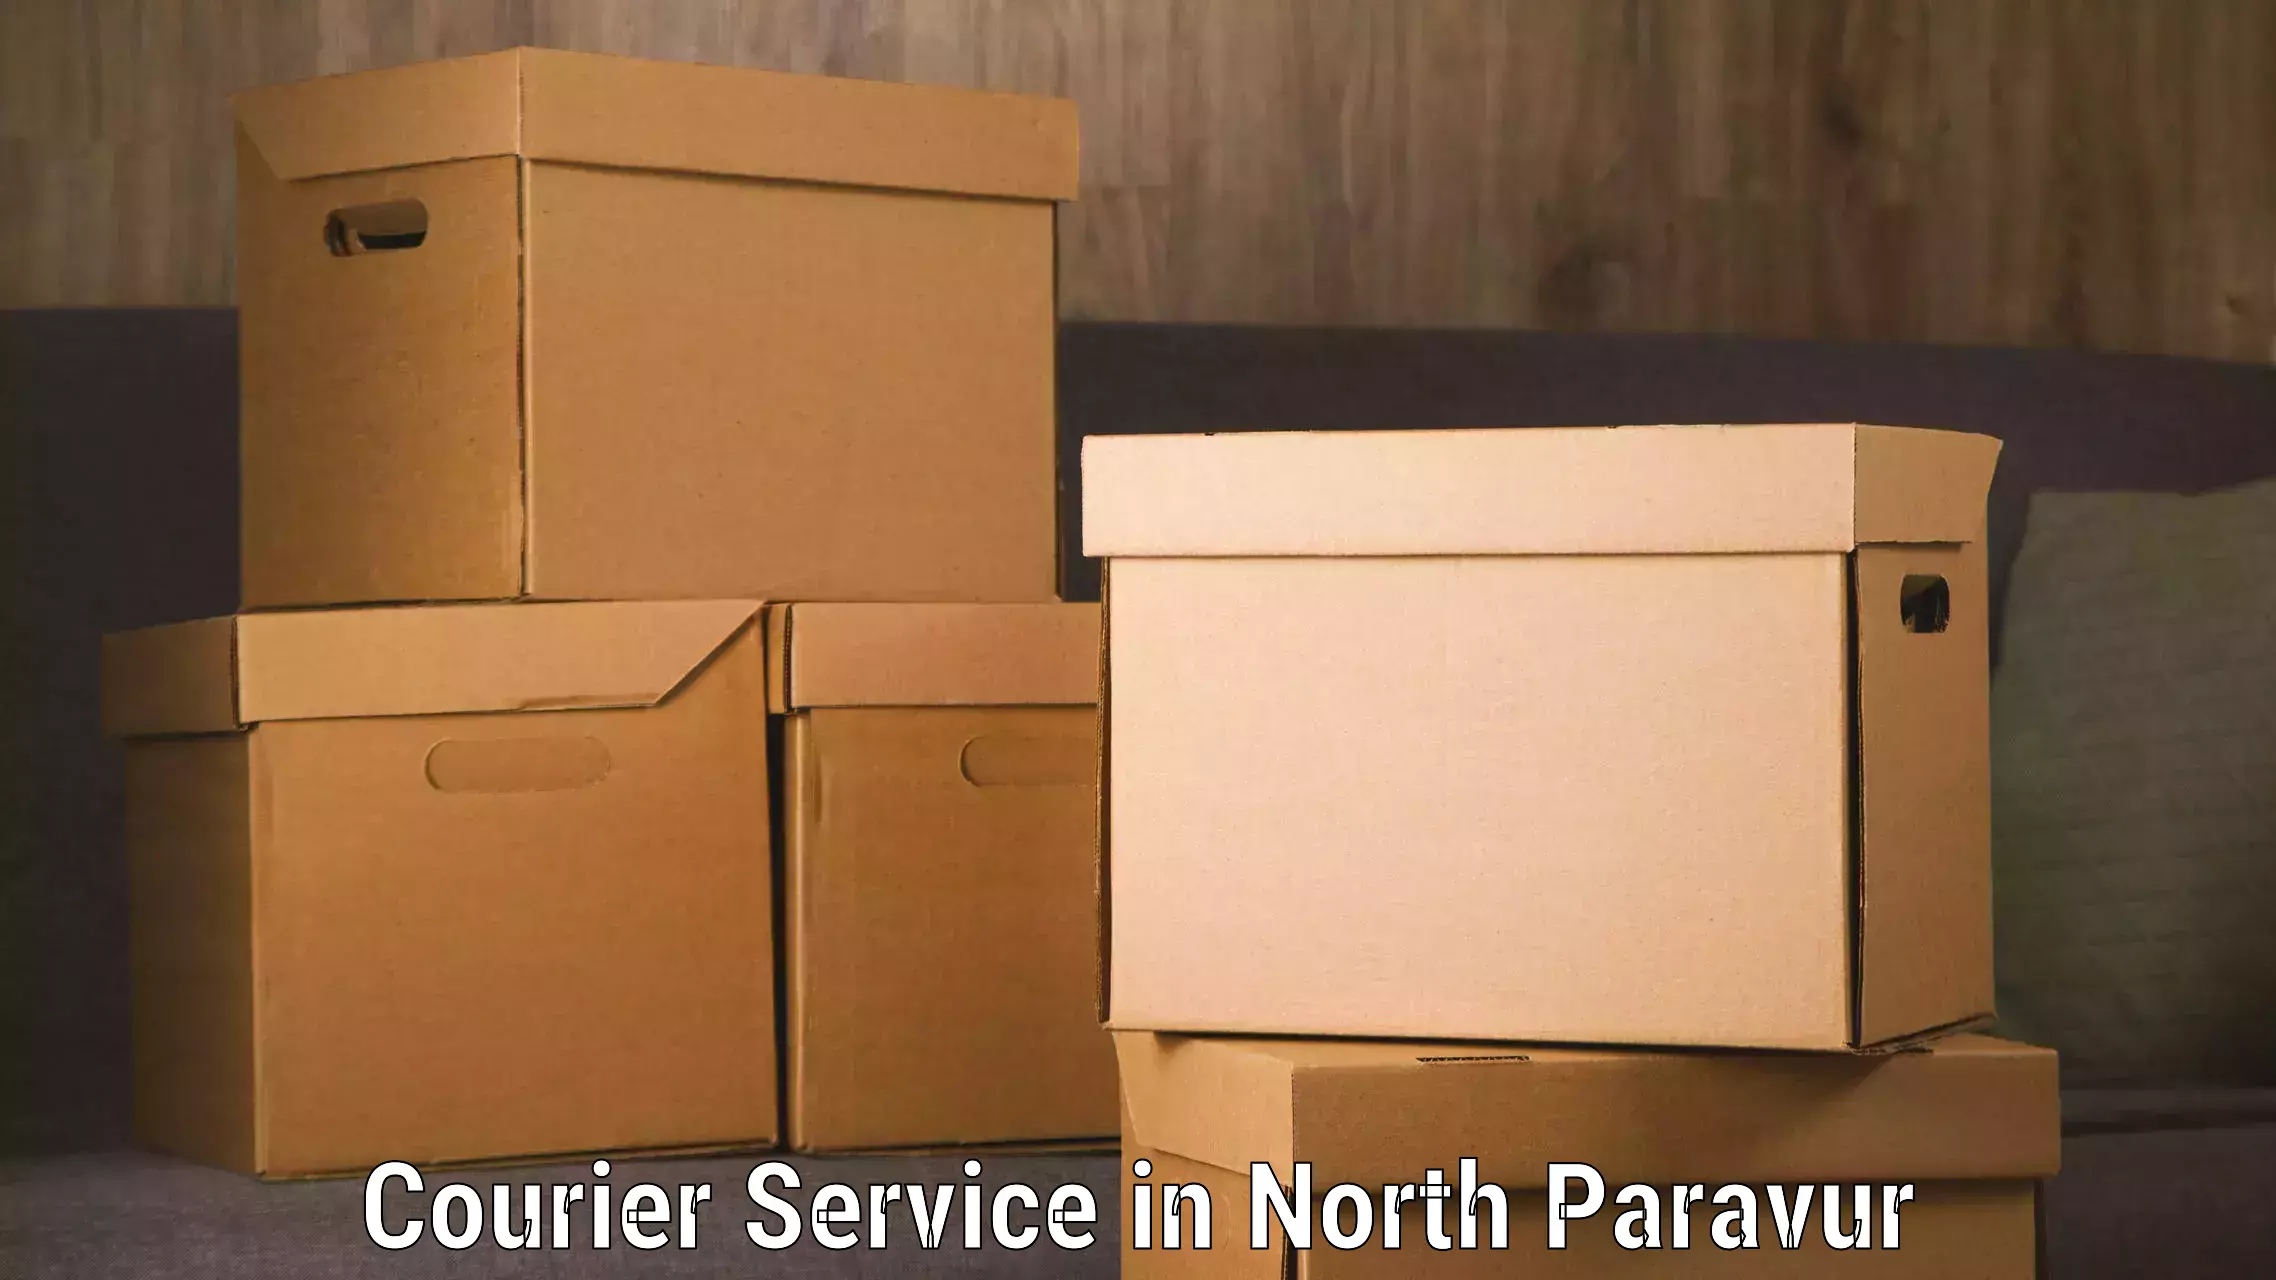 Enhanced delivery experience in North Paravur